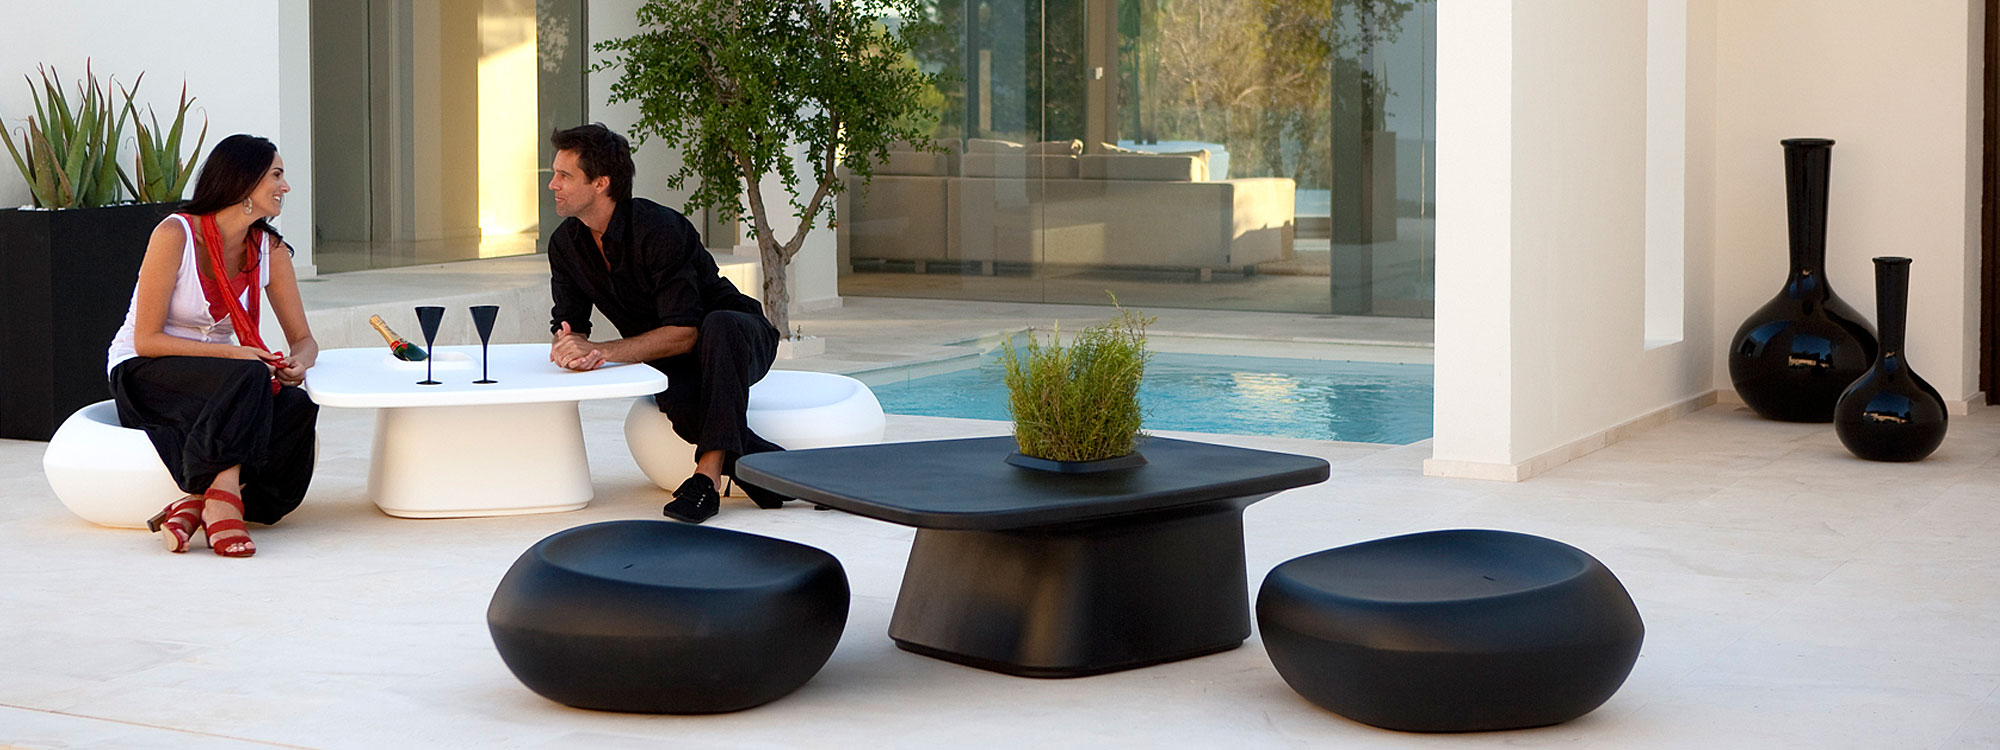 Image of 2 sets of black and white Moma low dining furniture in black and white, shown in tranquil courtyard with swimming pool in the background